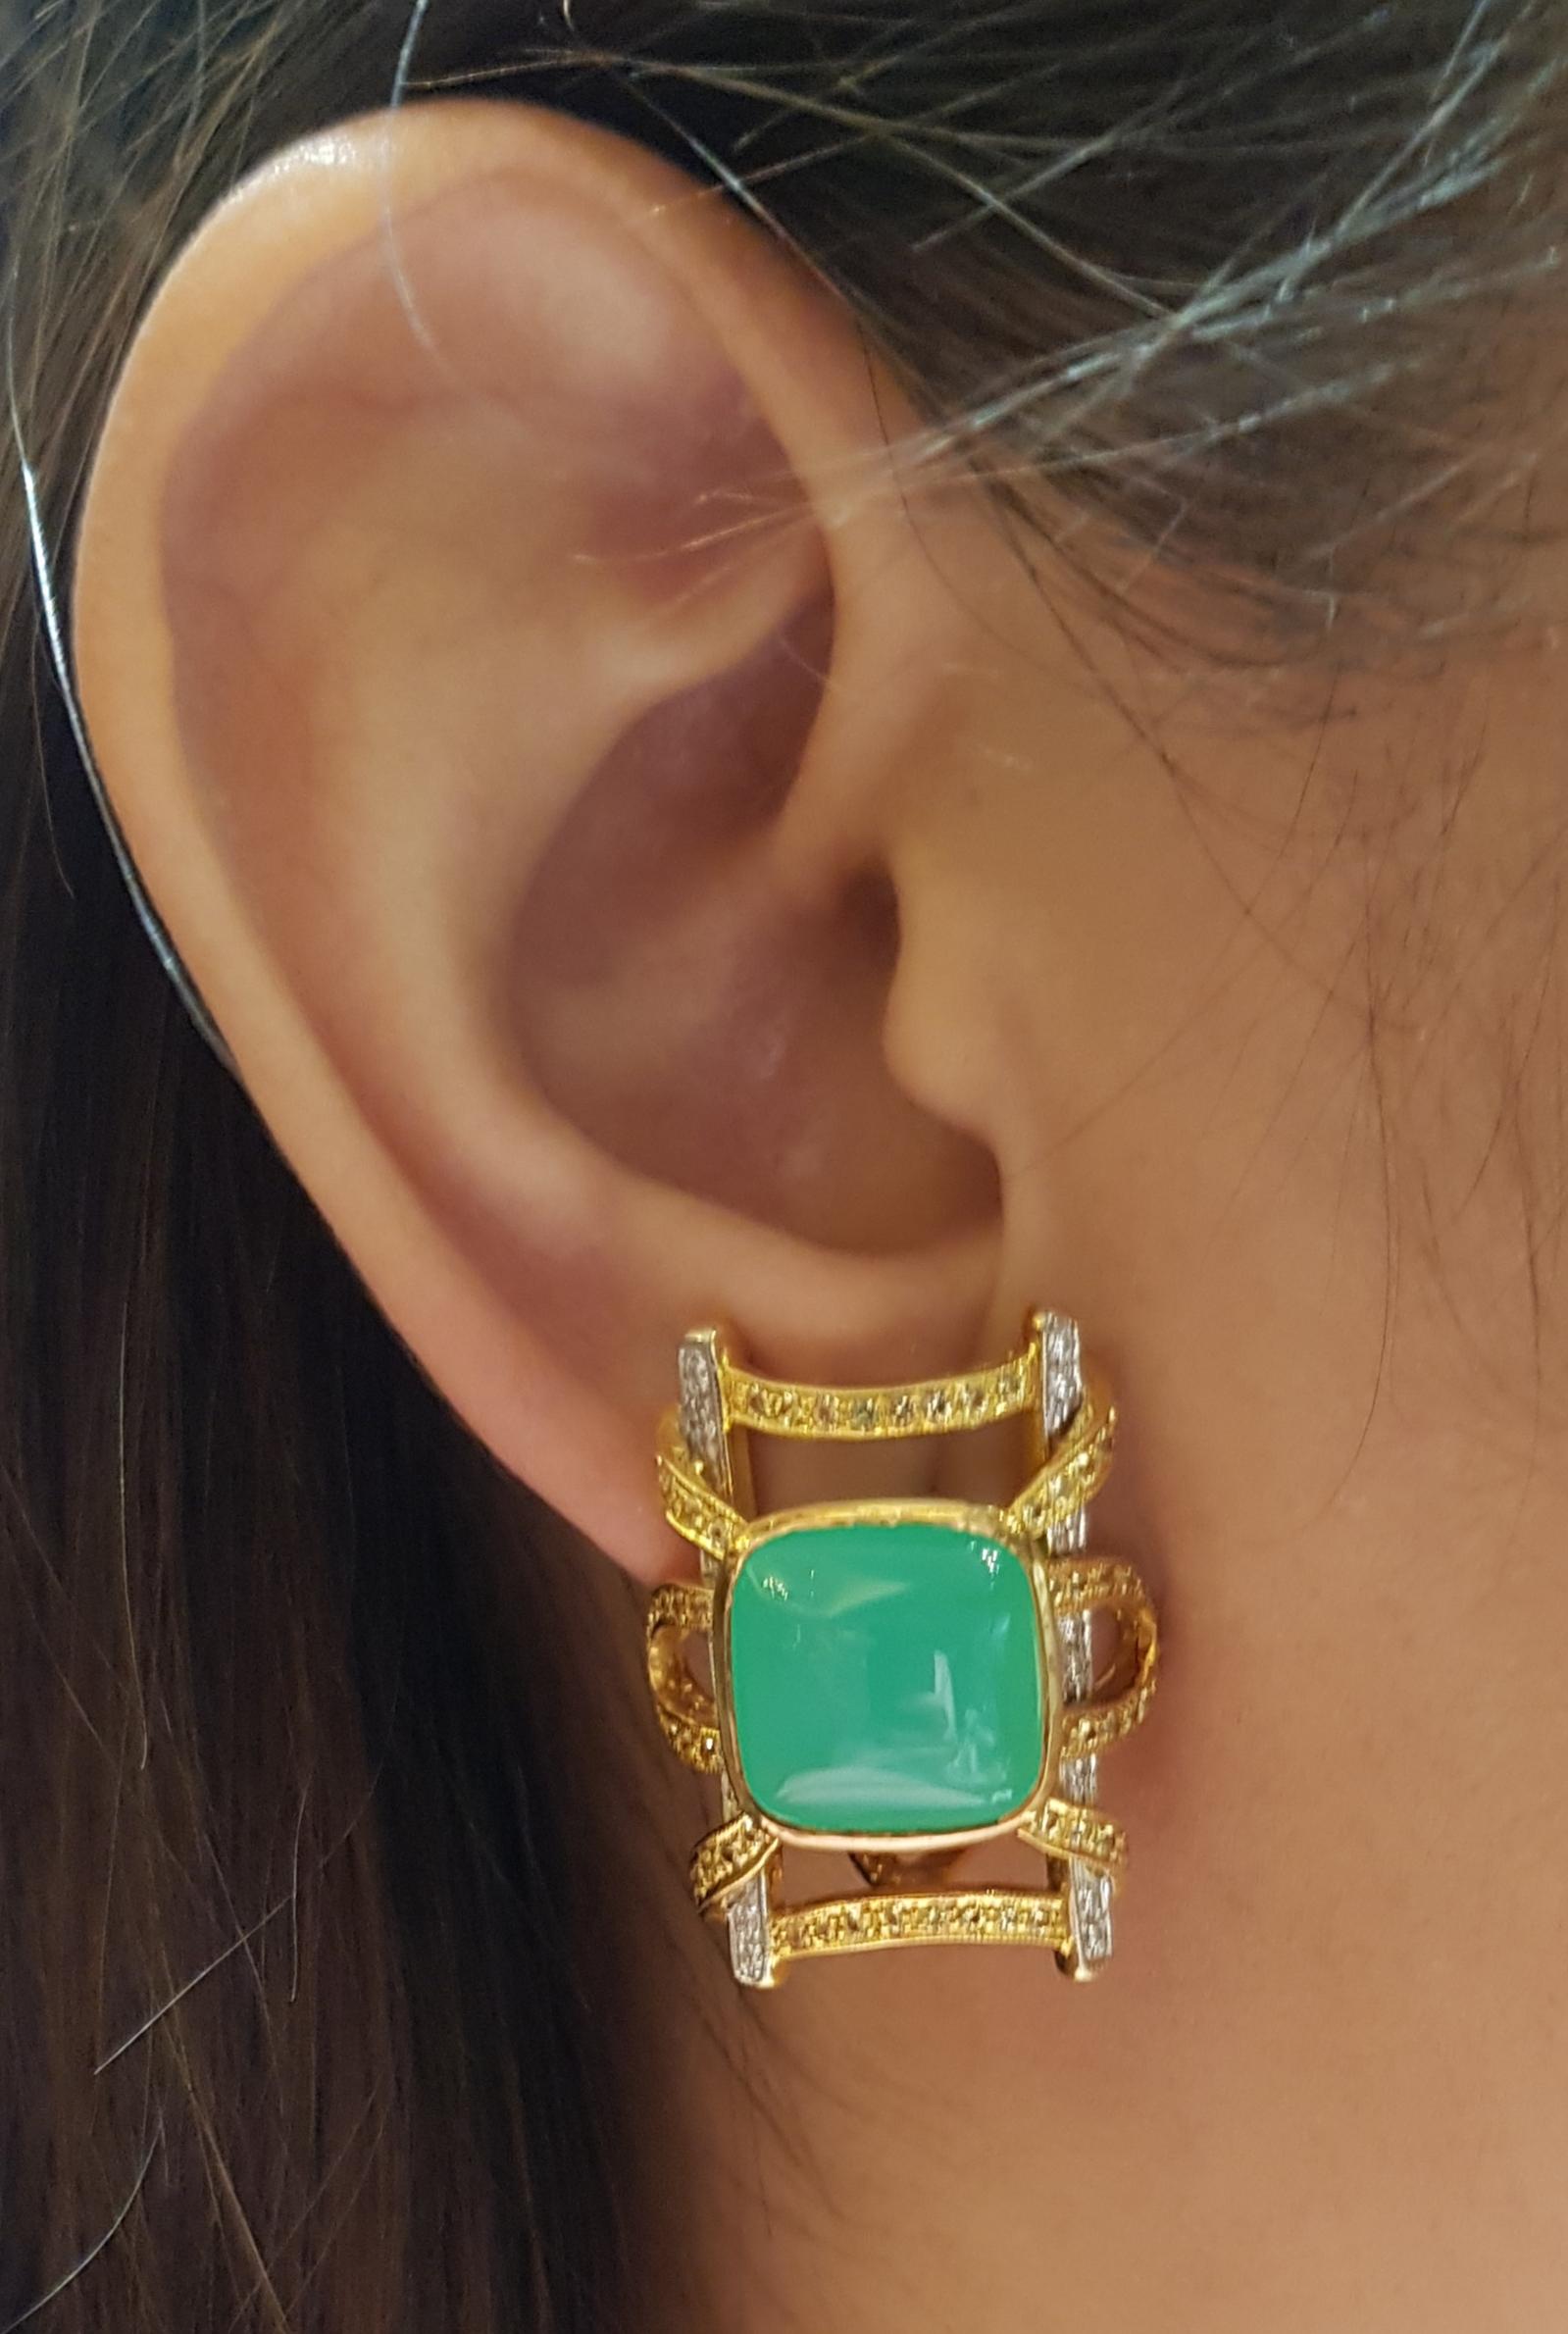 Chrysoprase 15.24 carats with Yellow Sapphire 1.34 carats and Diamond 0.30 carat Earrings set in 18 Karat Gold Settings

Width:  2.3 cm 
Length:  2.8 cm
Total Weight: 22.41 grams

